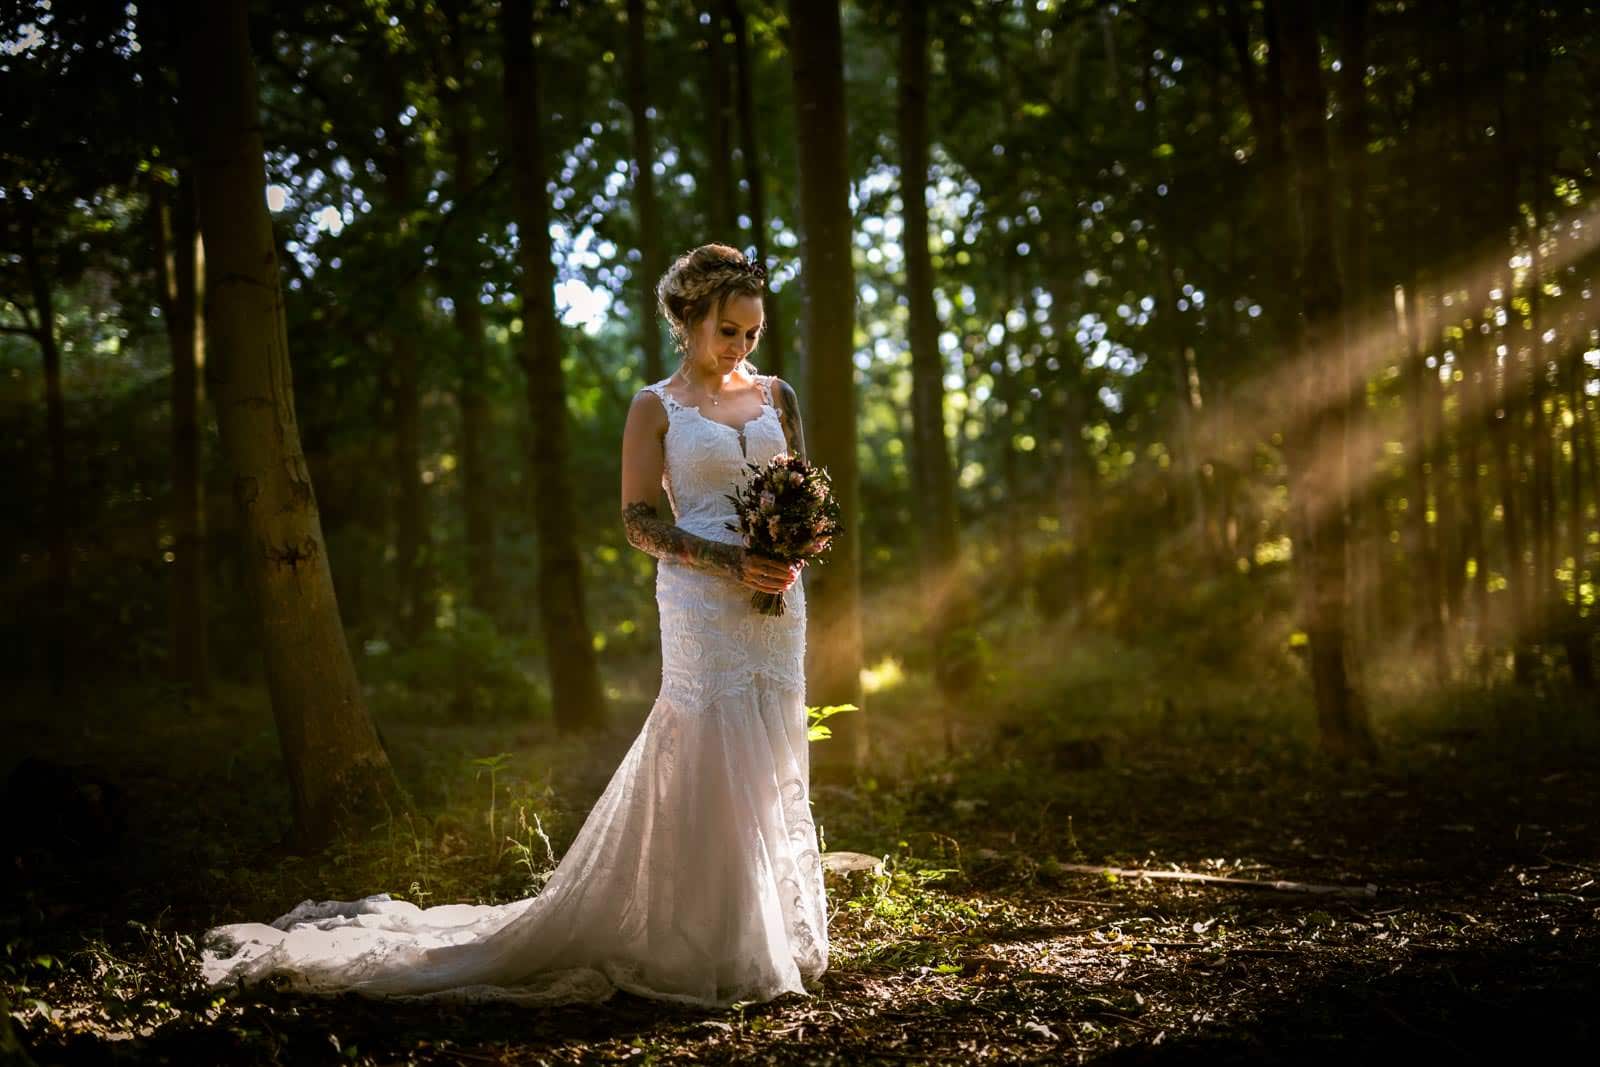 Beautiful photo taken at hunsbury hill center in Northampton. Bride standing in the forest being lit by sun beams